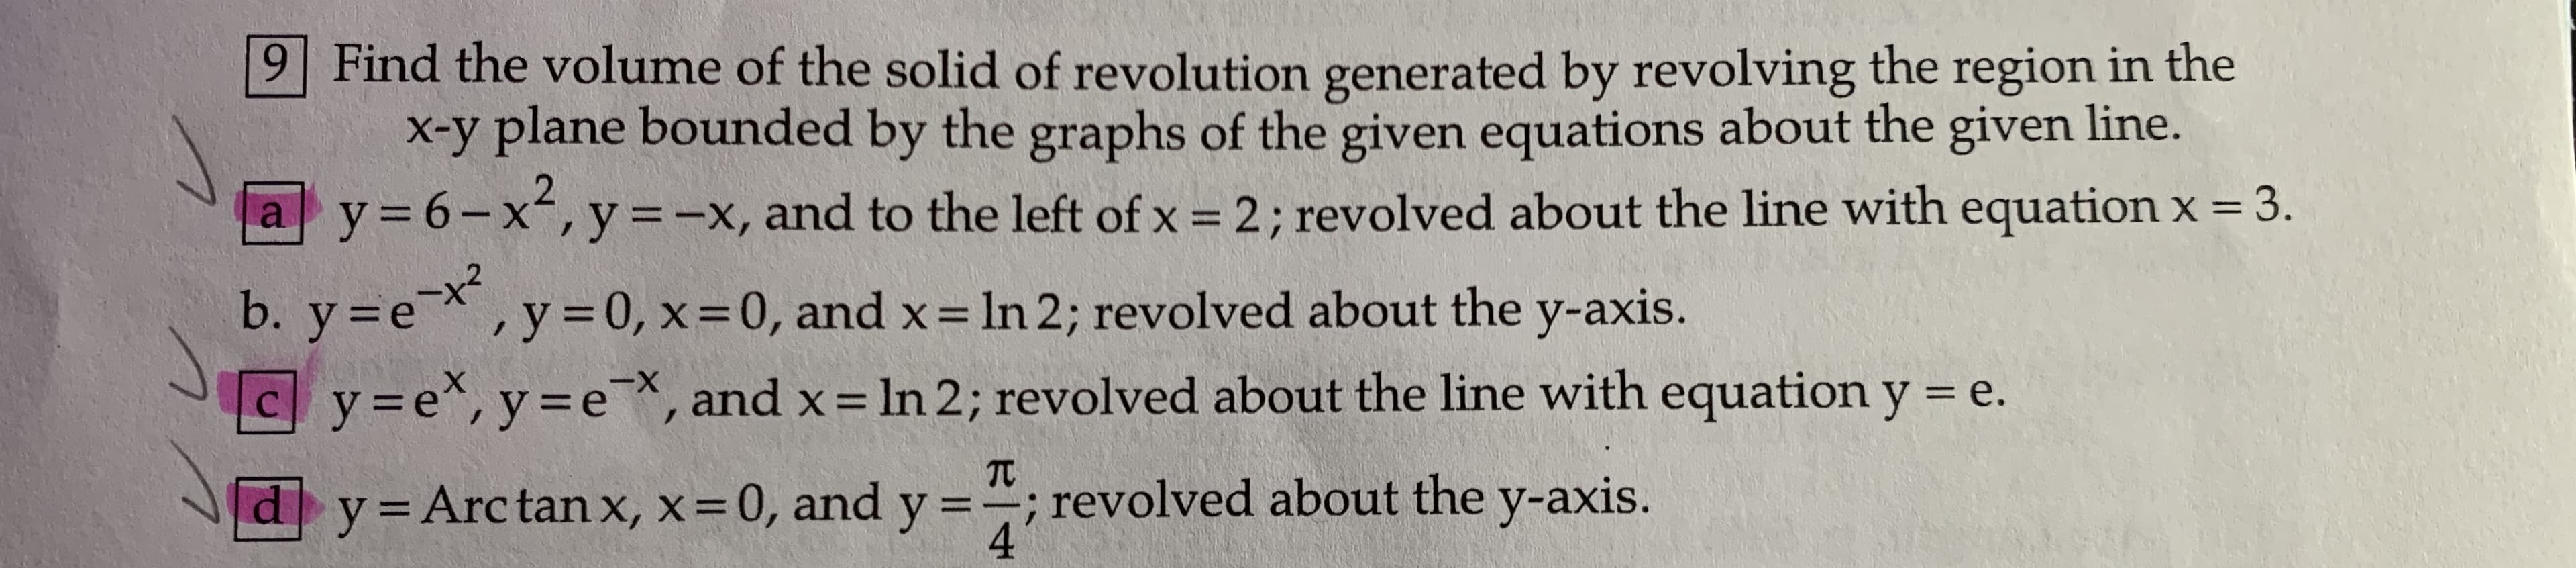 9 Find the volume of the solid of revolution generated by revolving the region in the
x-y plane bounded by the graphs of the given equations about the given line.
a y= 6-x², y=-x, and to the left of x = 2; revolved about the line with equation x = 3.
%3D
b. y=e,y=0, x=0, and x = In 2; revolved about the y-axis.
Cy3e*, y=e*, and x= In 2; revolved about the line with equation y = e.
X-
%3D
TC
y=Arctan x, x=0, and y ="; revolved about the y-axis.
4
